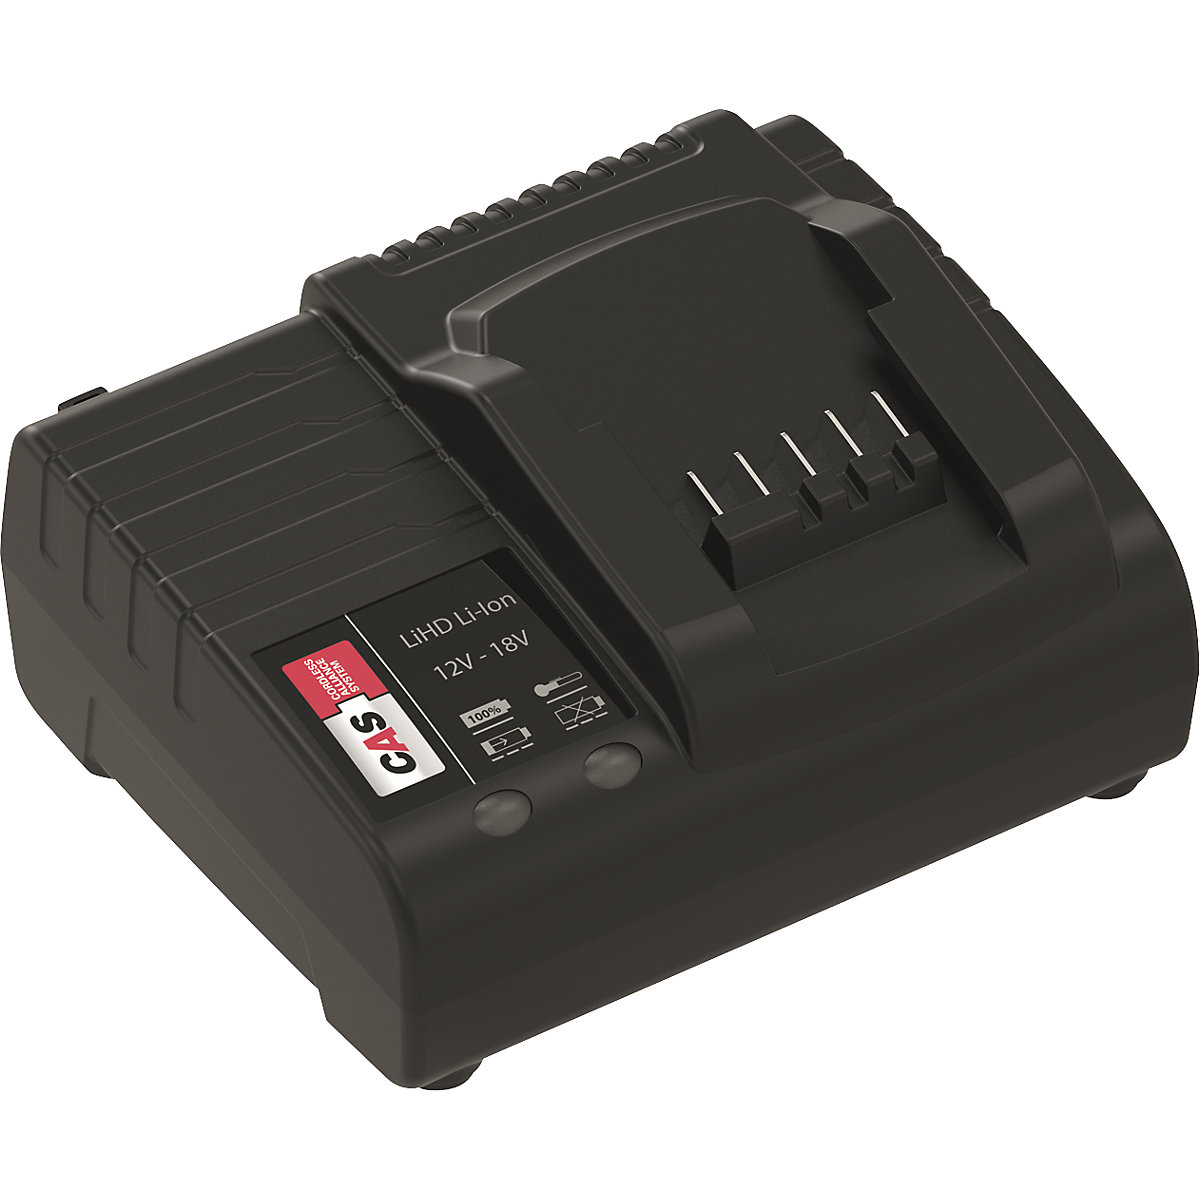 Rechargeable battery charger – SCANGRIP